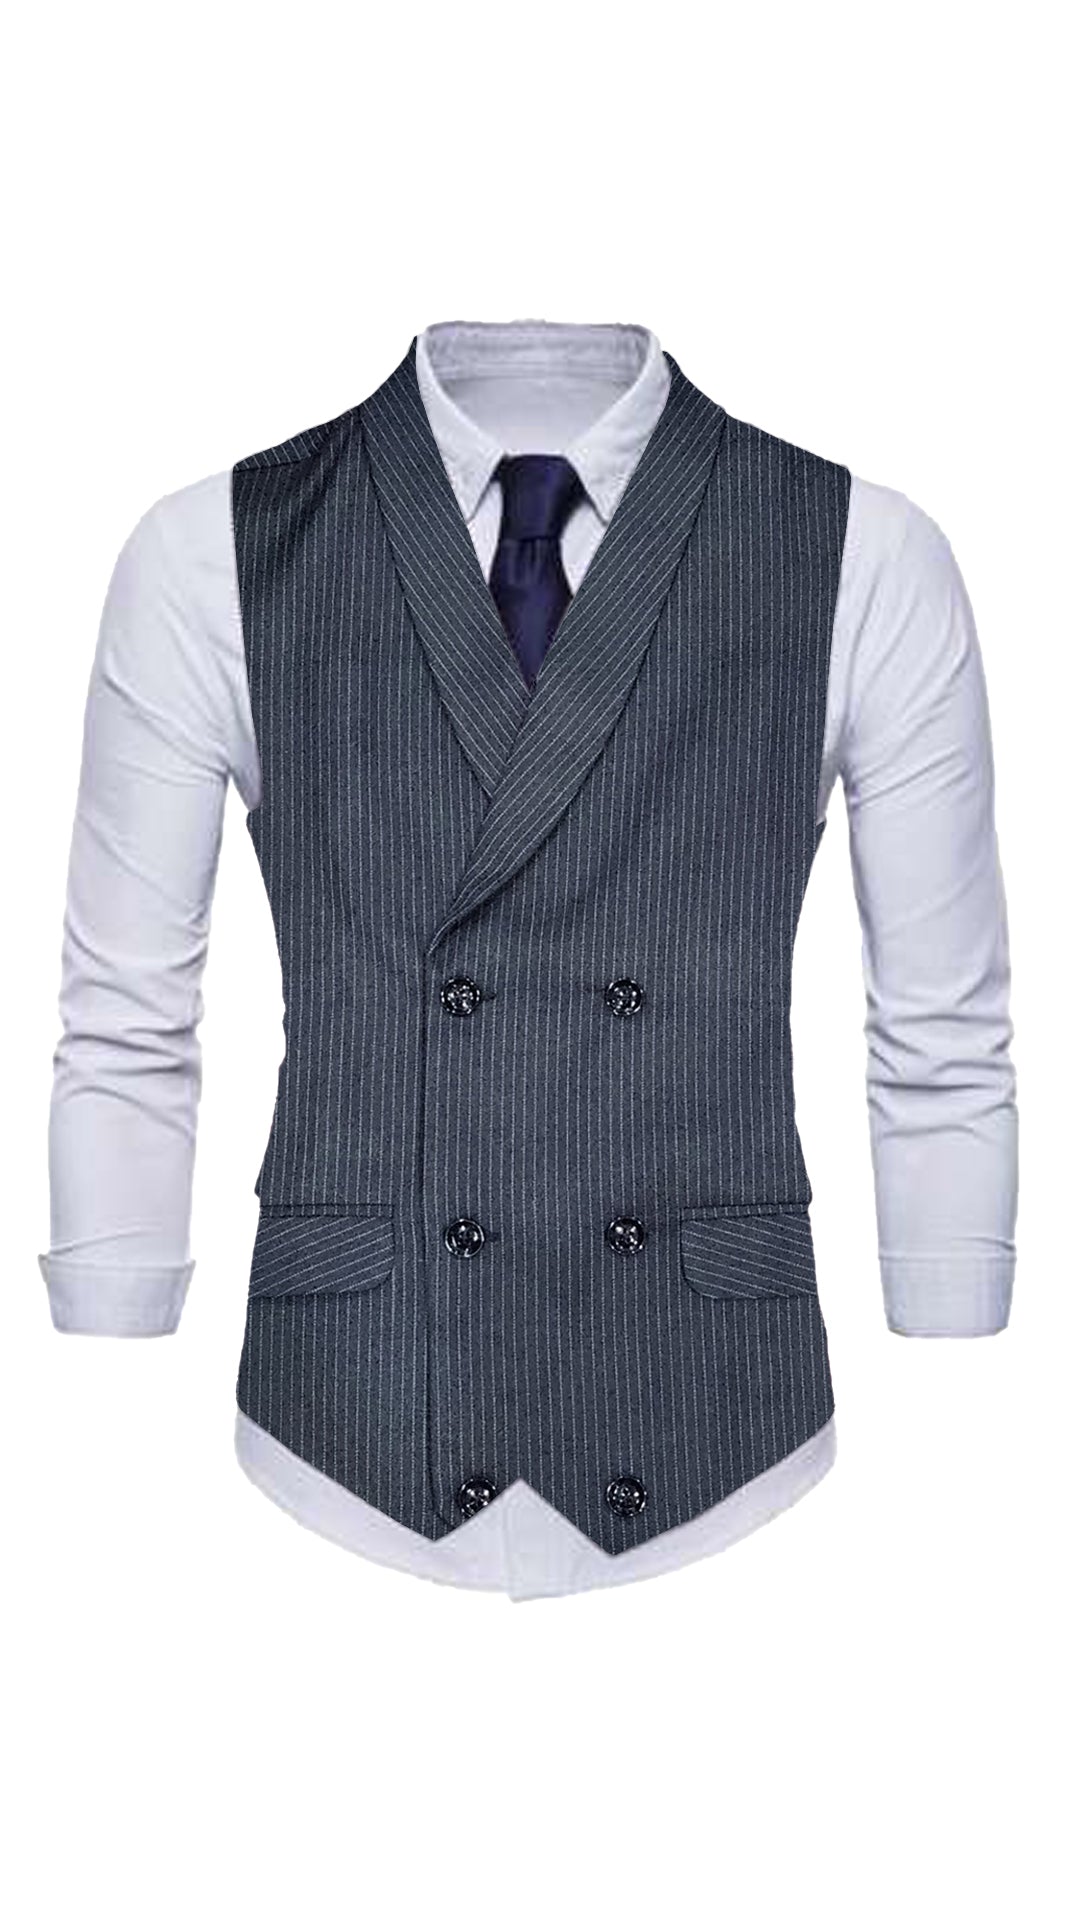 Men's Plaid Double-Breasted Charcoal Waistcoat only